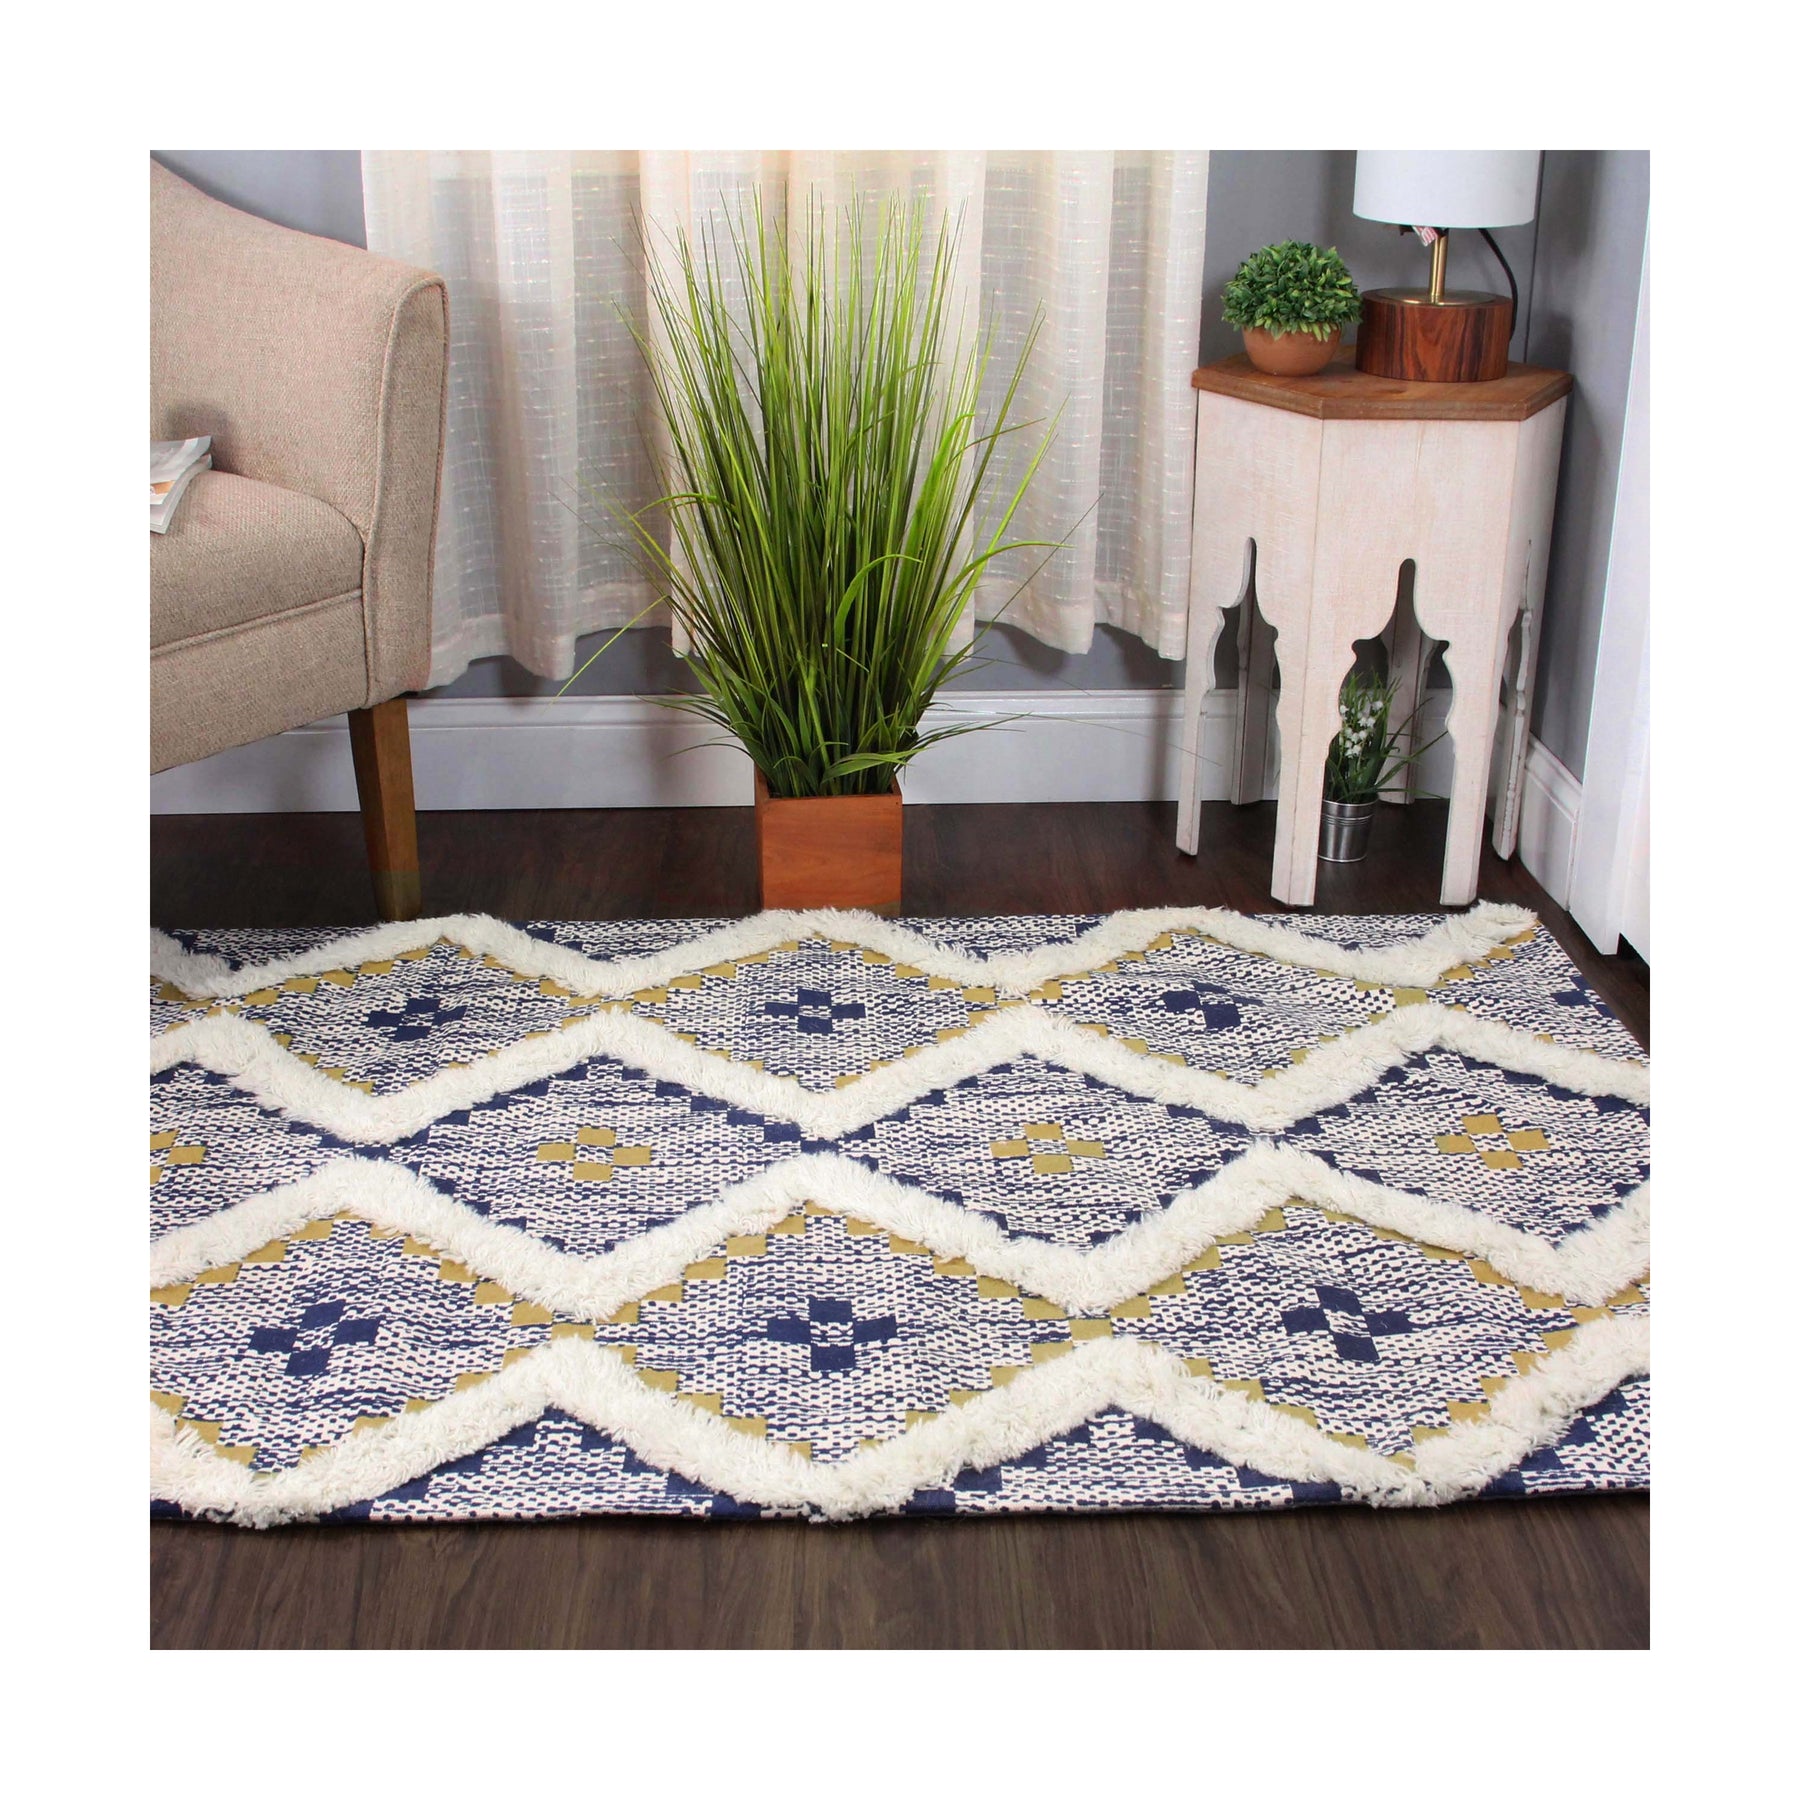 Superior Indoor Area Rug Collection Geometric Design with Cotton-Latex Backing - Gold - Navy Blue